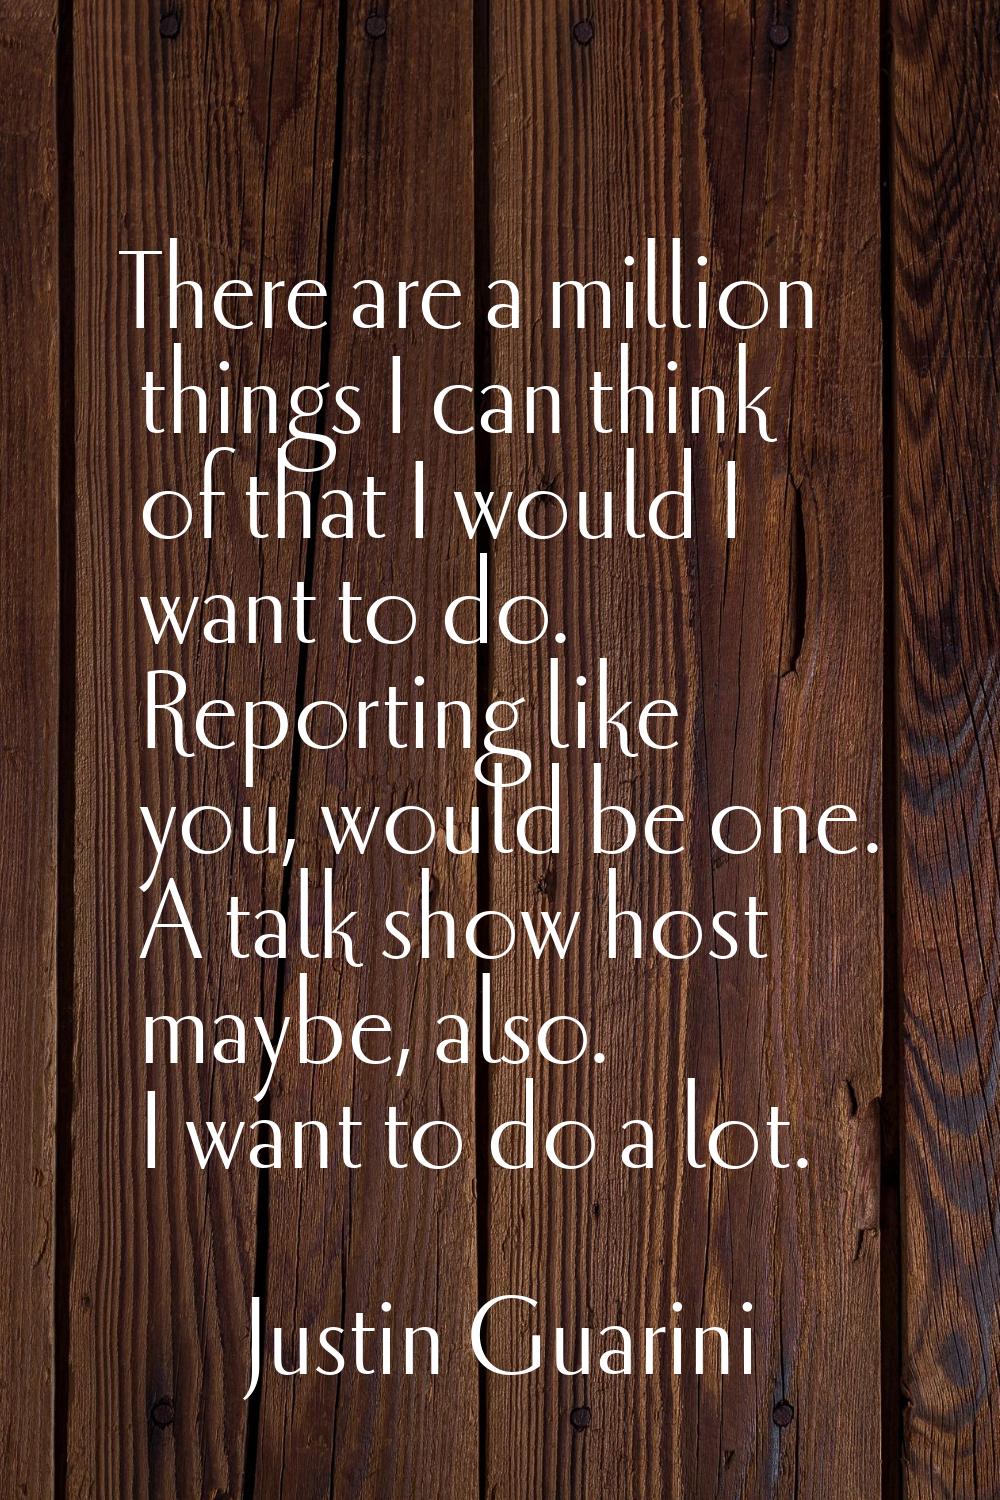 There are a million things I can think of that I would I want to do. Reporting like you, would be o